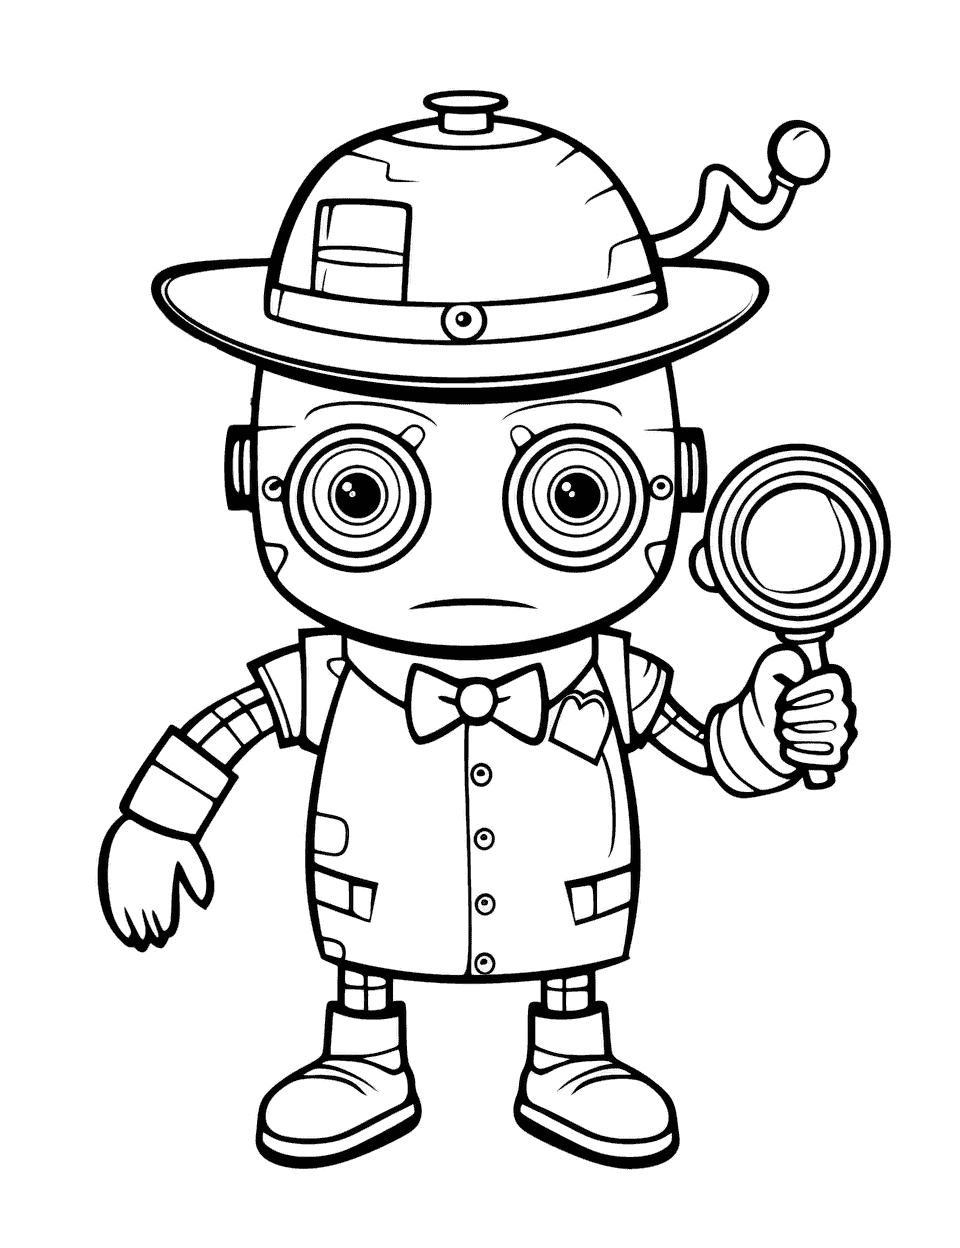 Detective Robot Solving a Mystery Coloring Page - A robot in a detective hat with a magnifying glass.